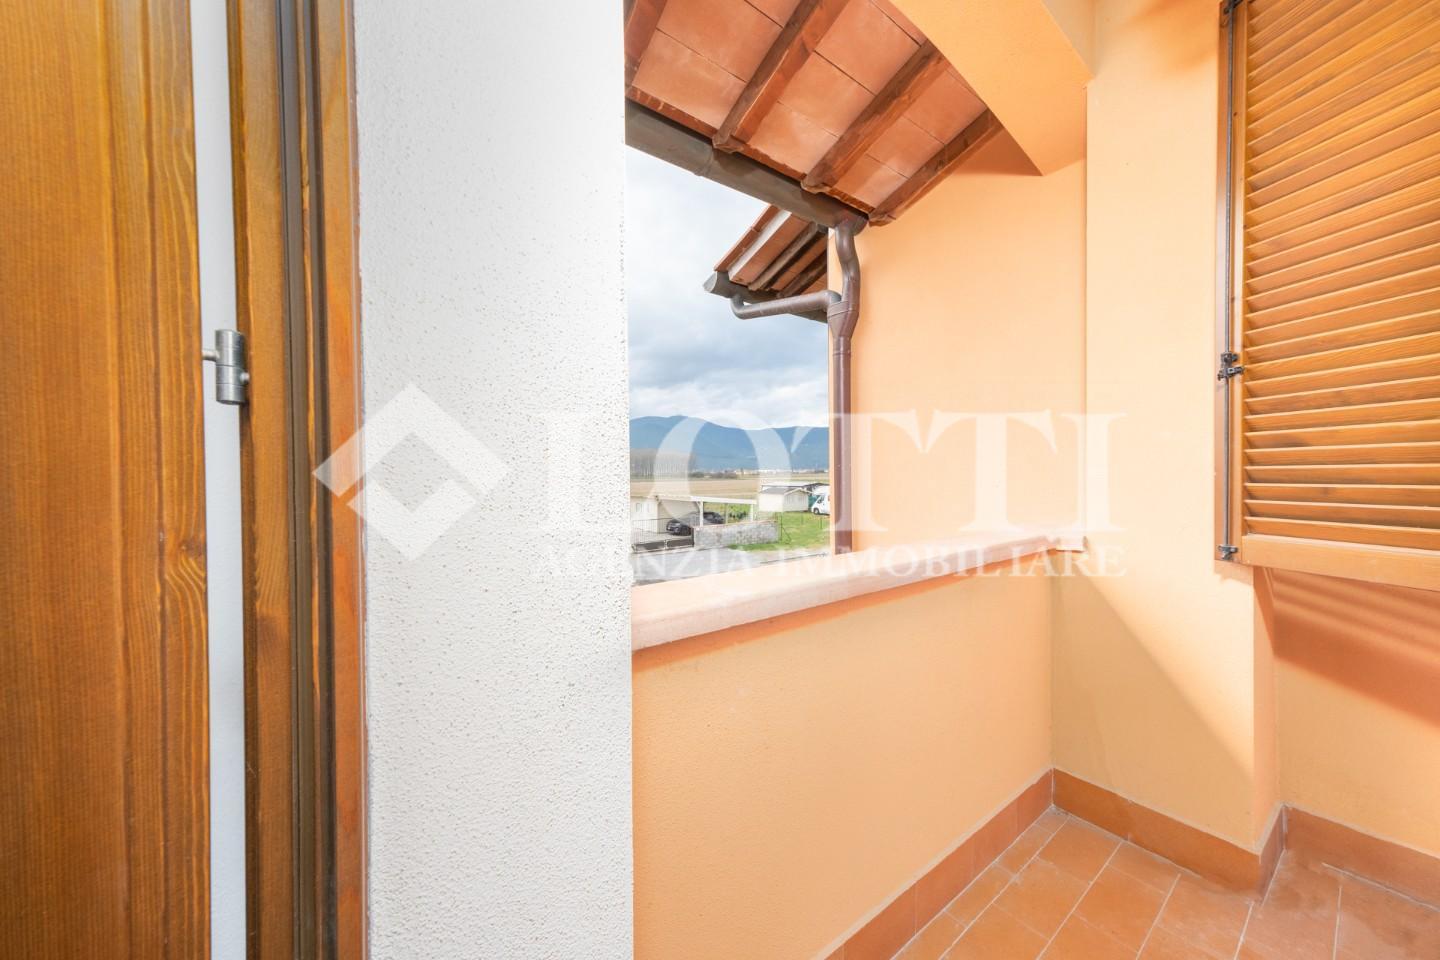 Terraced house for sale, ref. 749